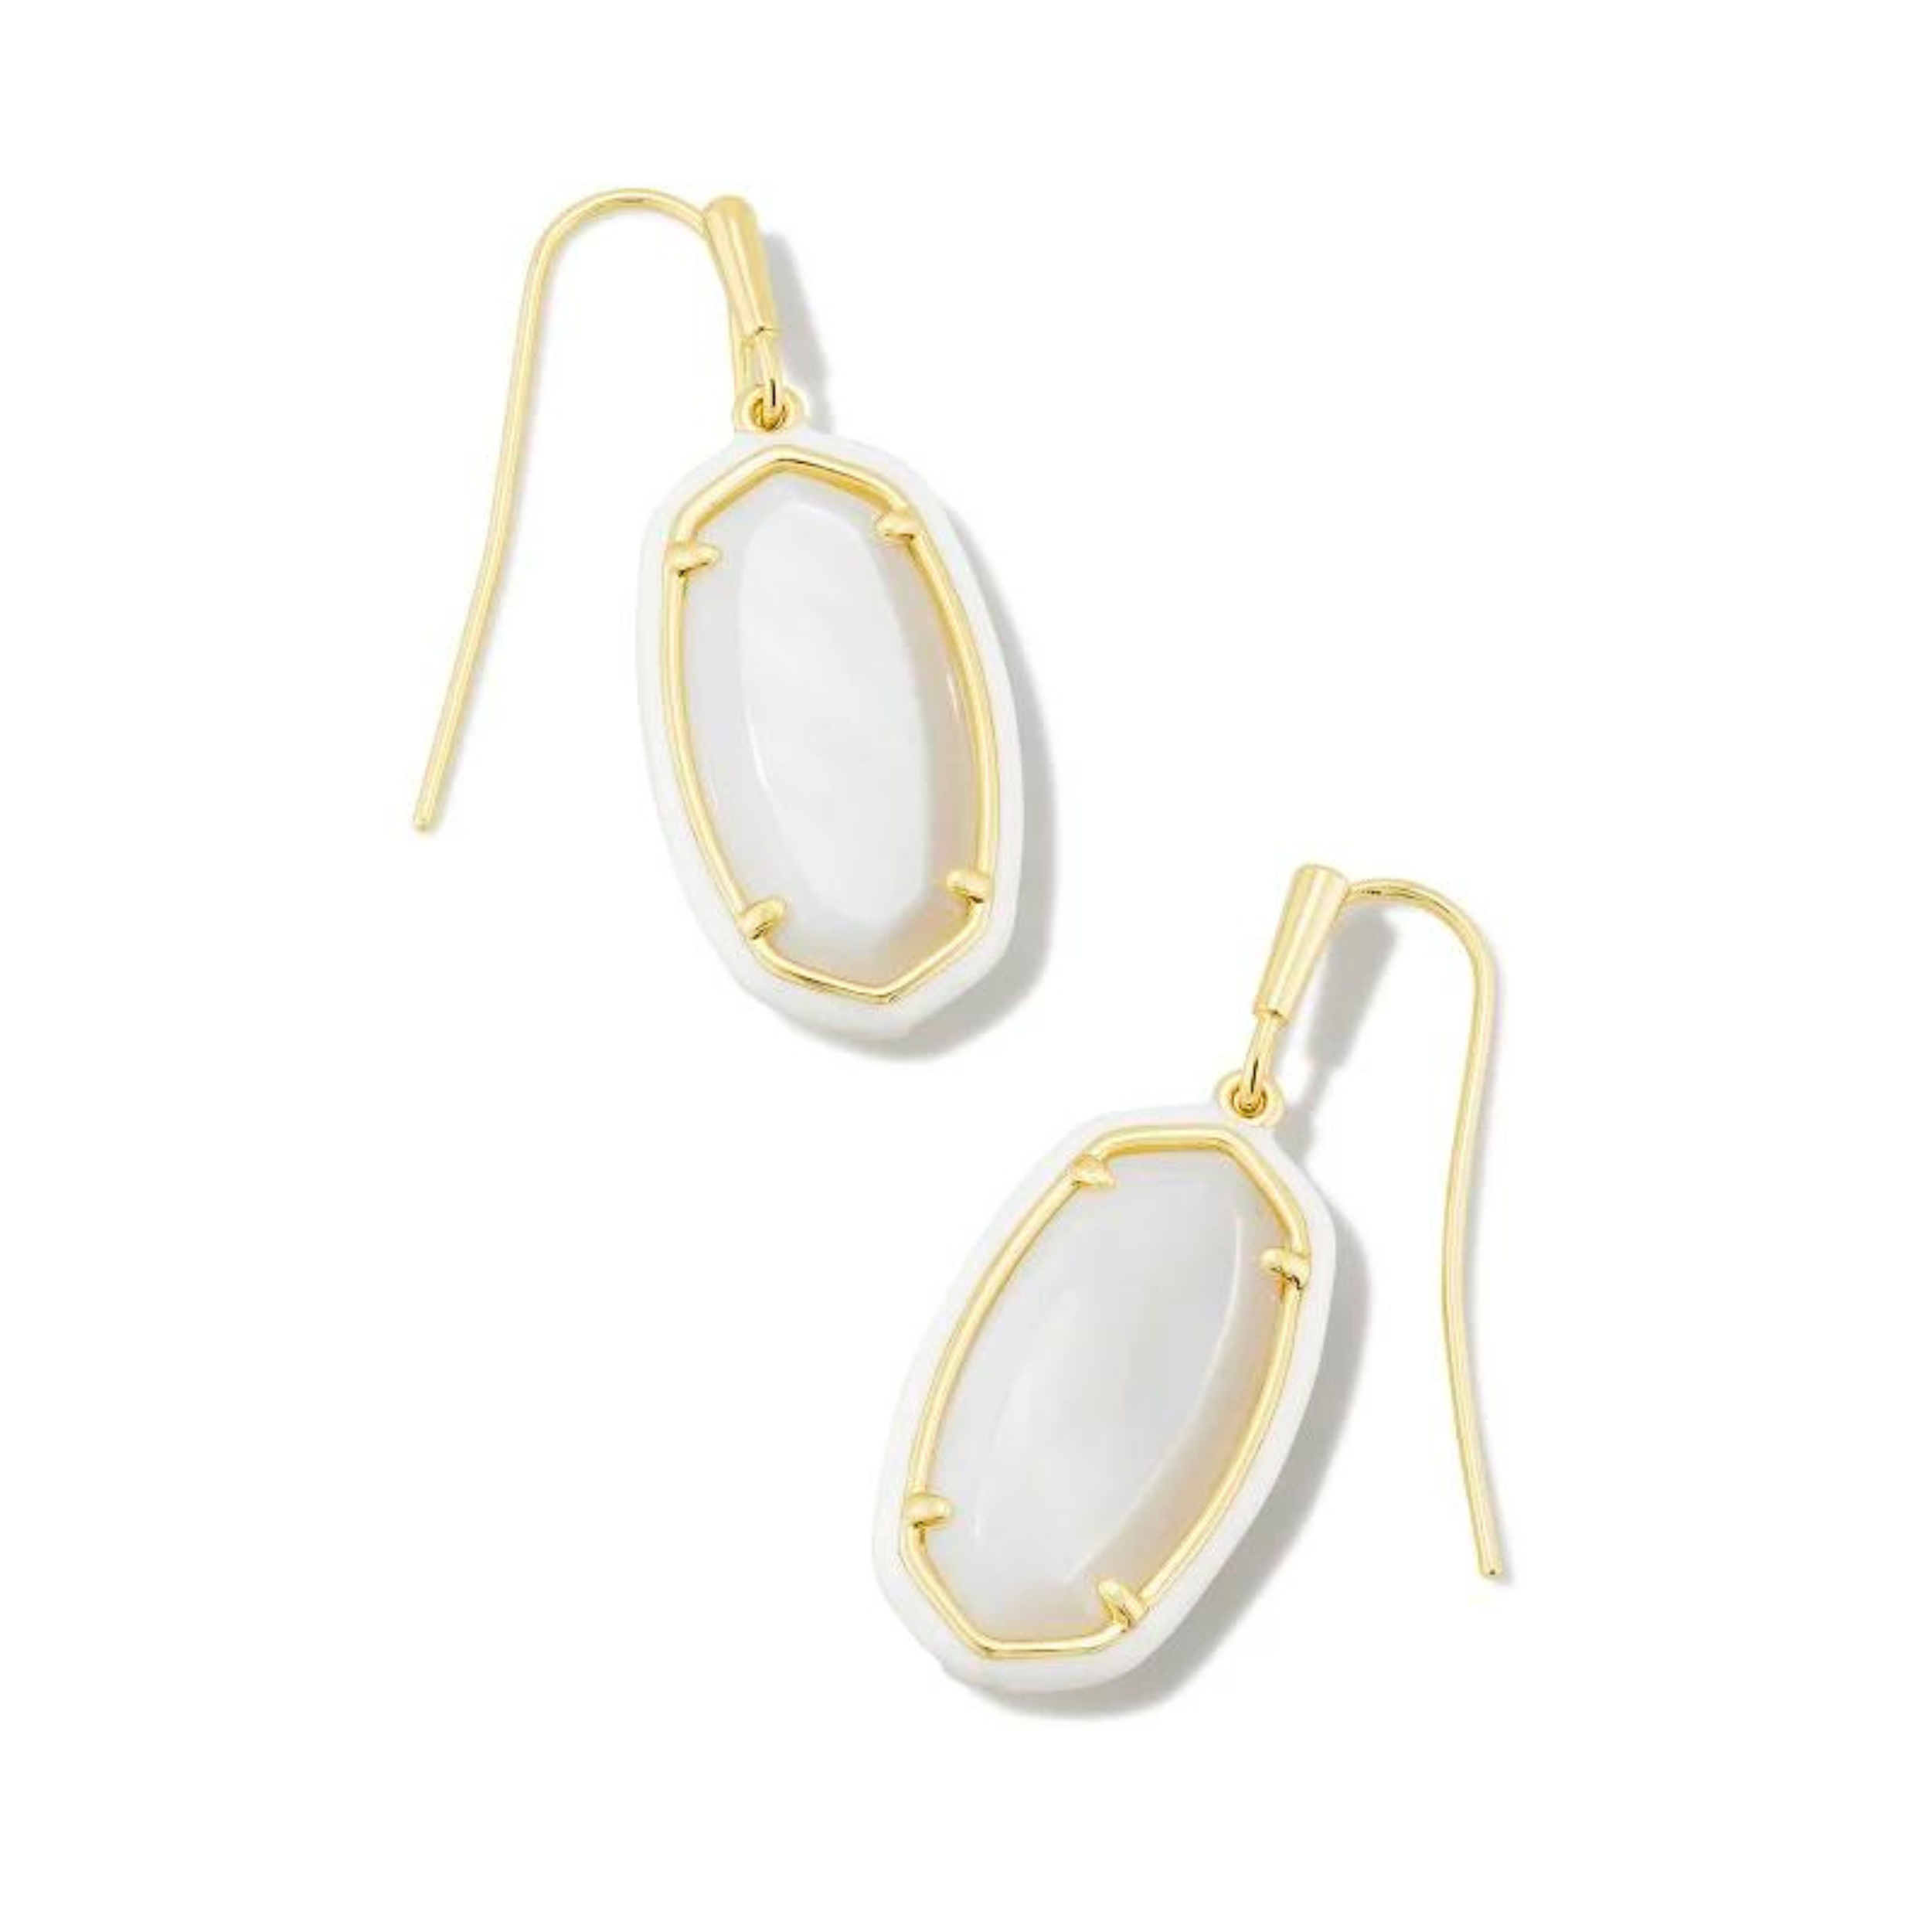 White framed, oval shaped drop earrings with a center white stone and a gold fish hook earring. These earrings are pictured on a white background. 